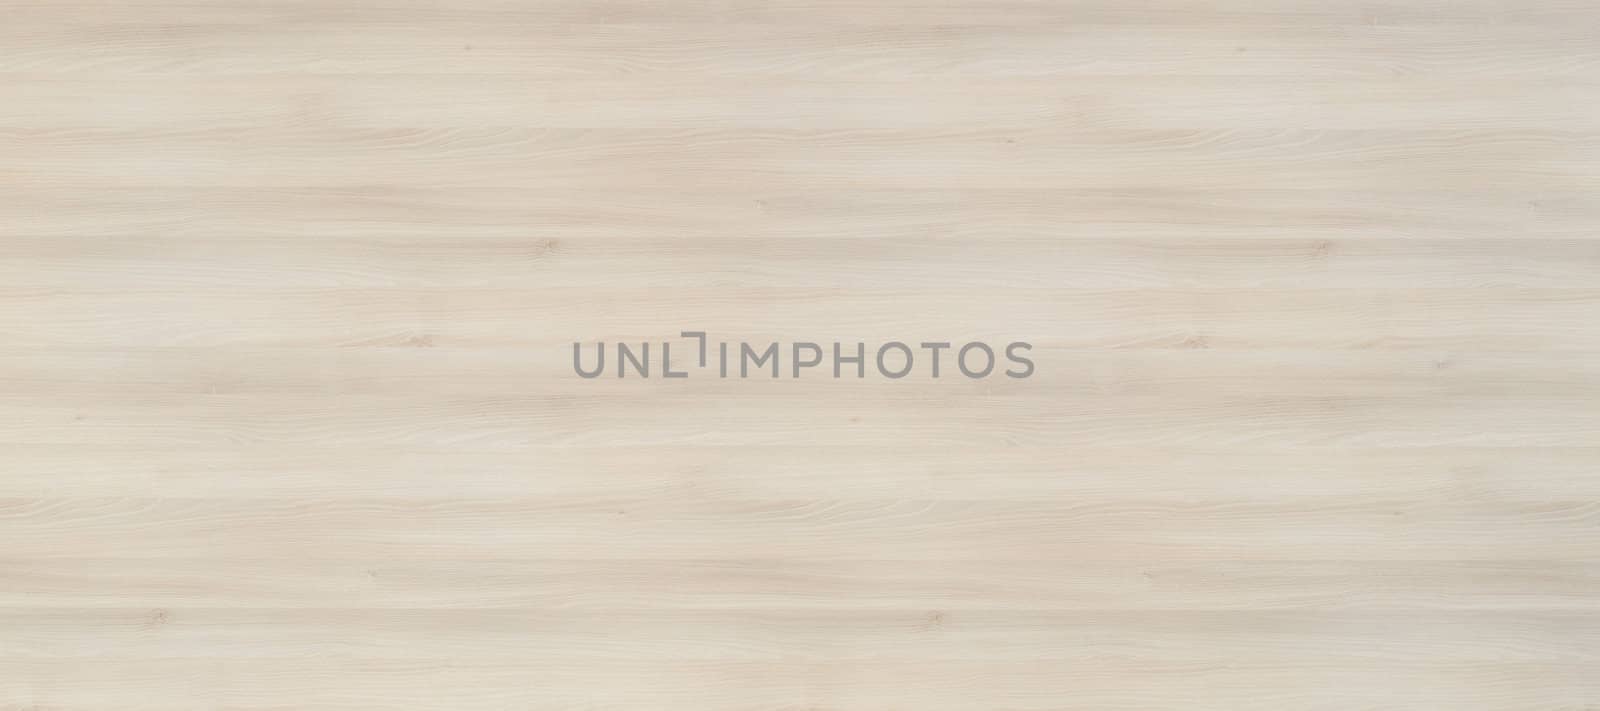 Large grainy wood background or texture by Baltus